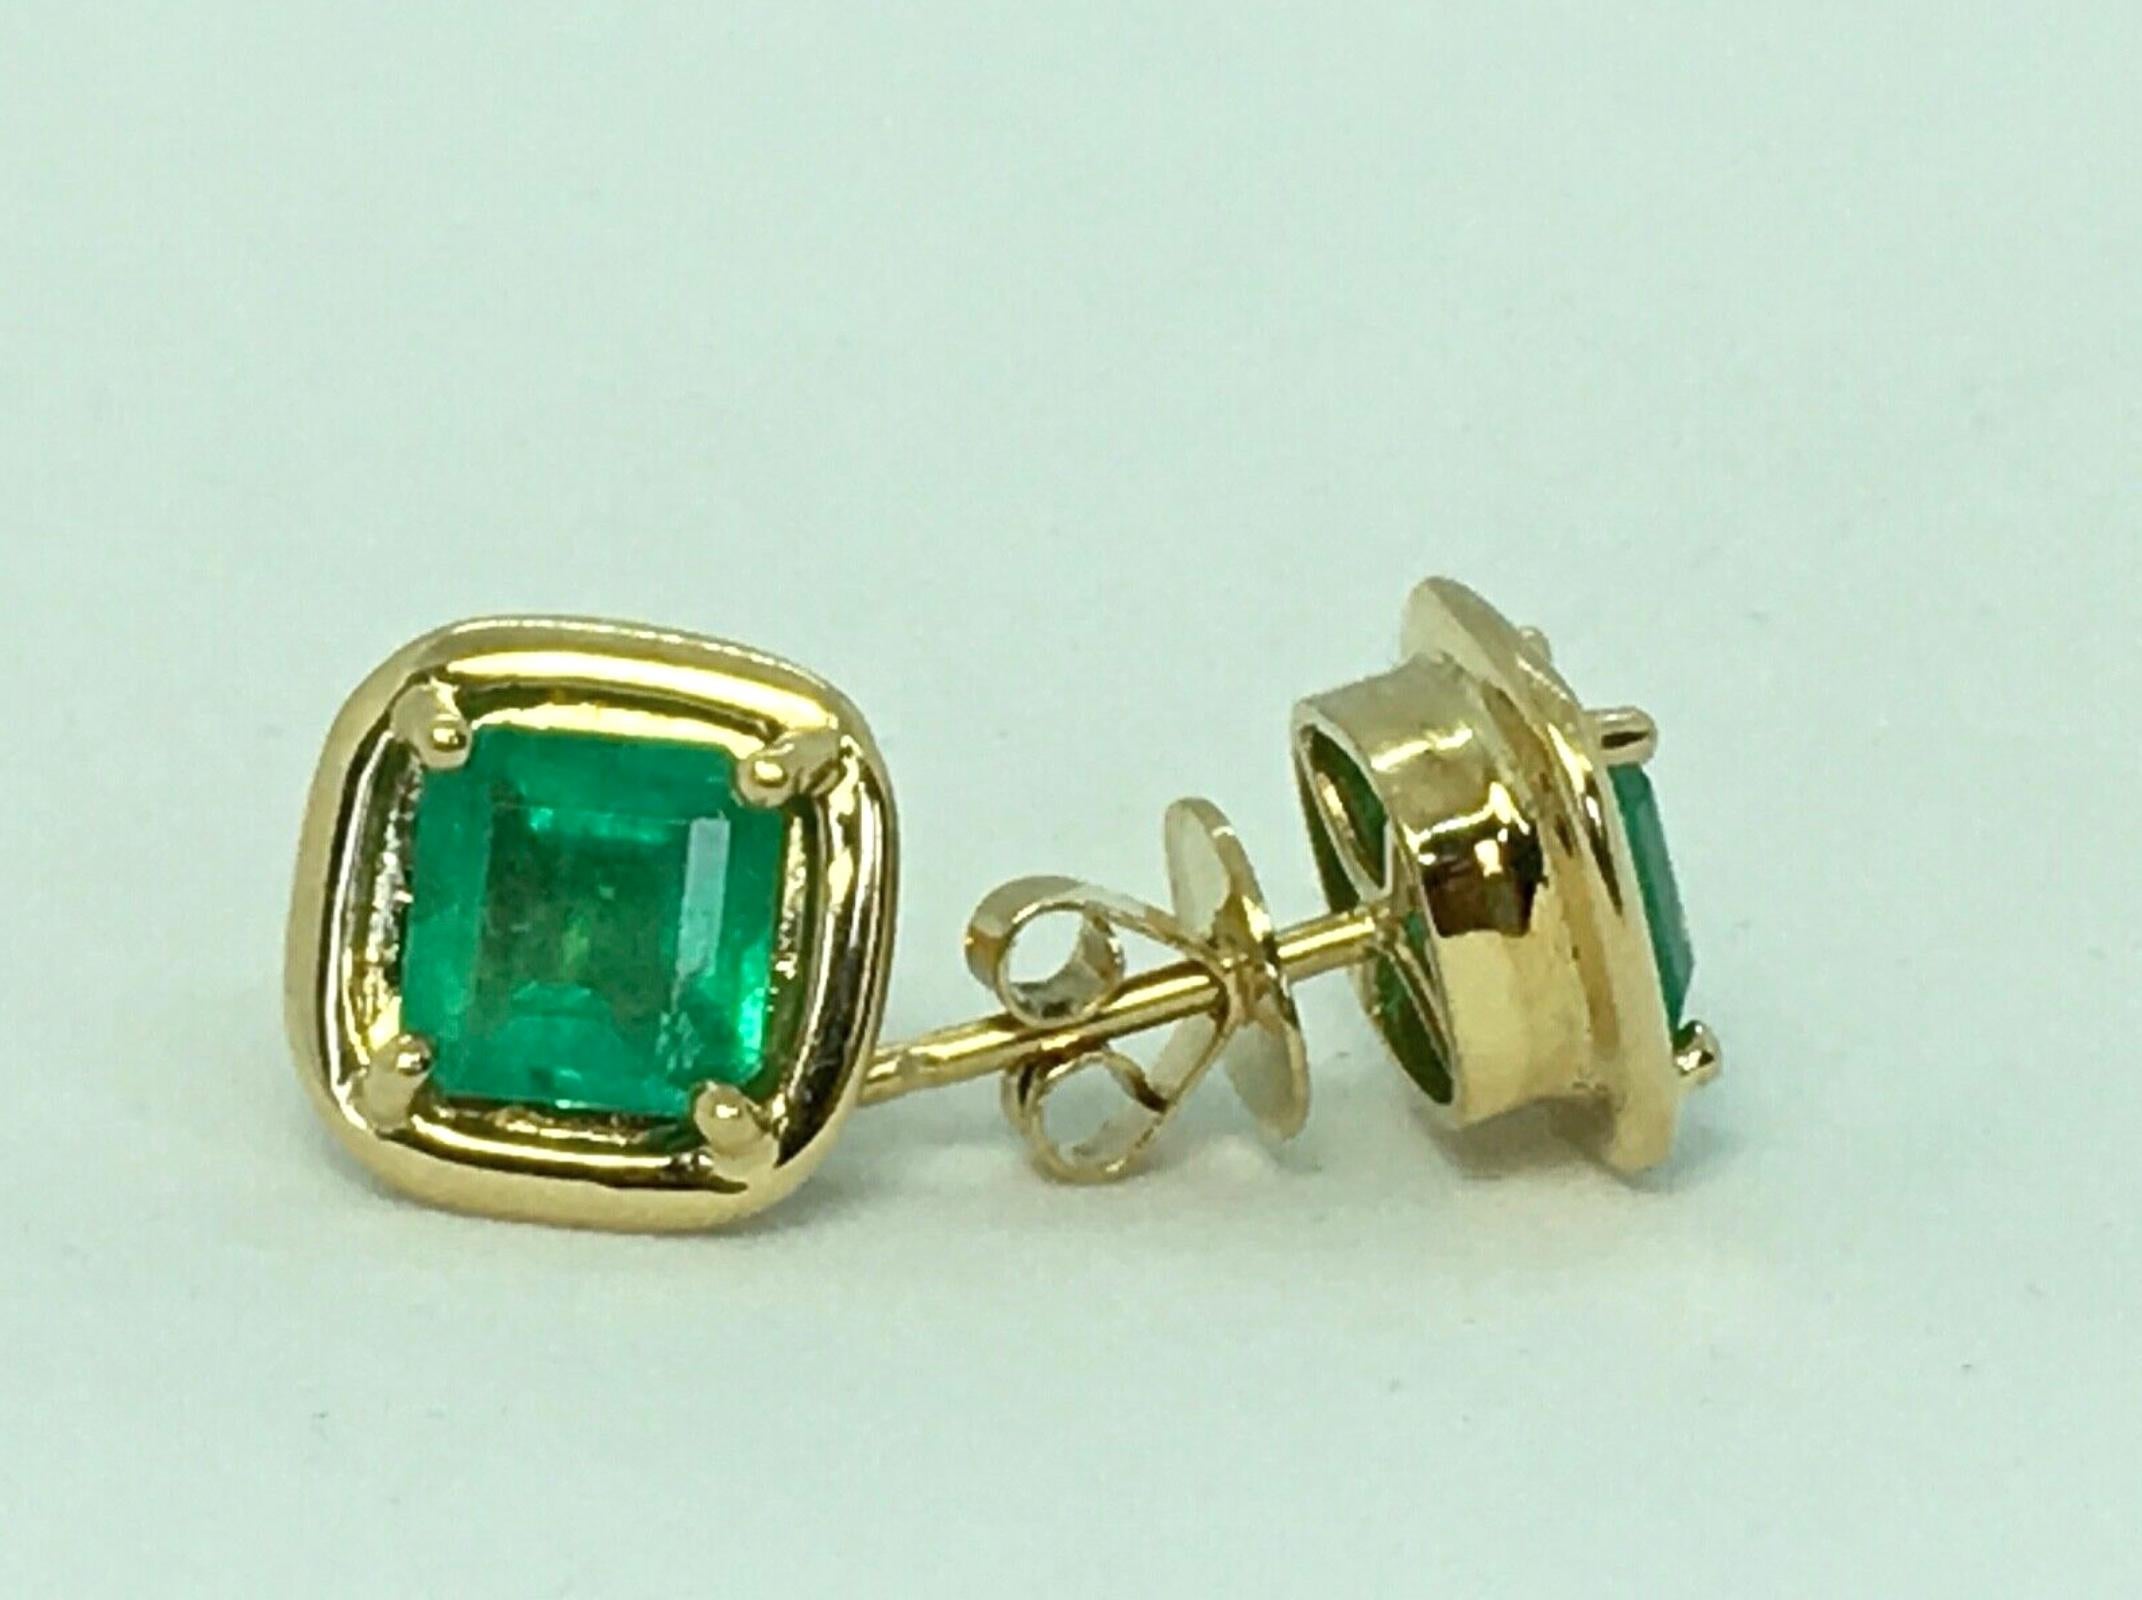 Square Colombian Emerald Diamond Stud Earrings 18 Karat
Elegant Stud Earrings Natural Medium Green Colombian Emerald Emerald Cut Total Weight 4.50 carats. Made of Solid 18K Yellow Gold 6.6g. Push Back
Condition: New